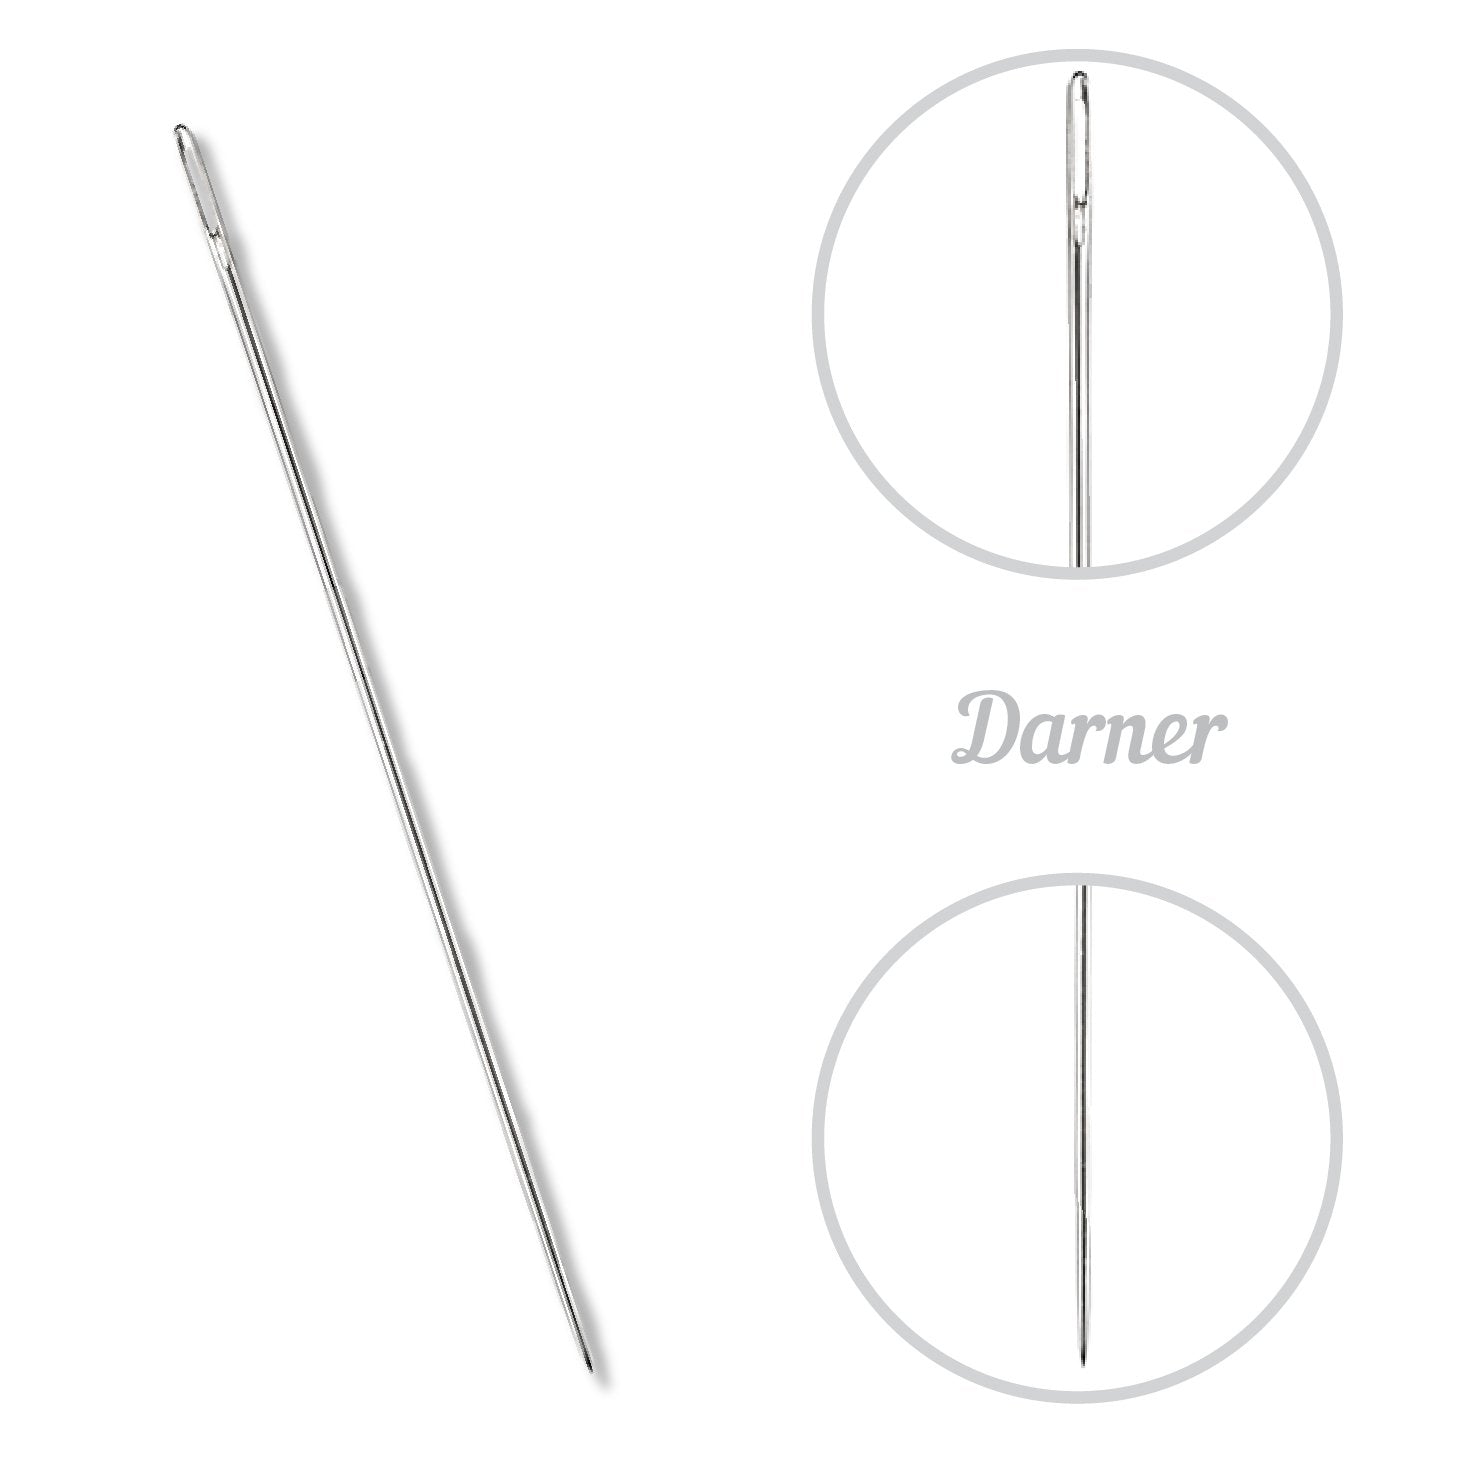 CN - Colonial Needle -Darners - Assortment - #14 - #05